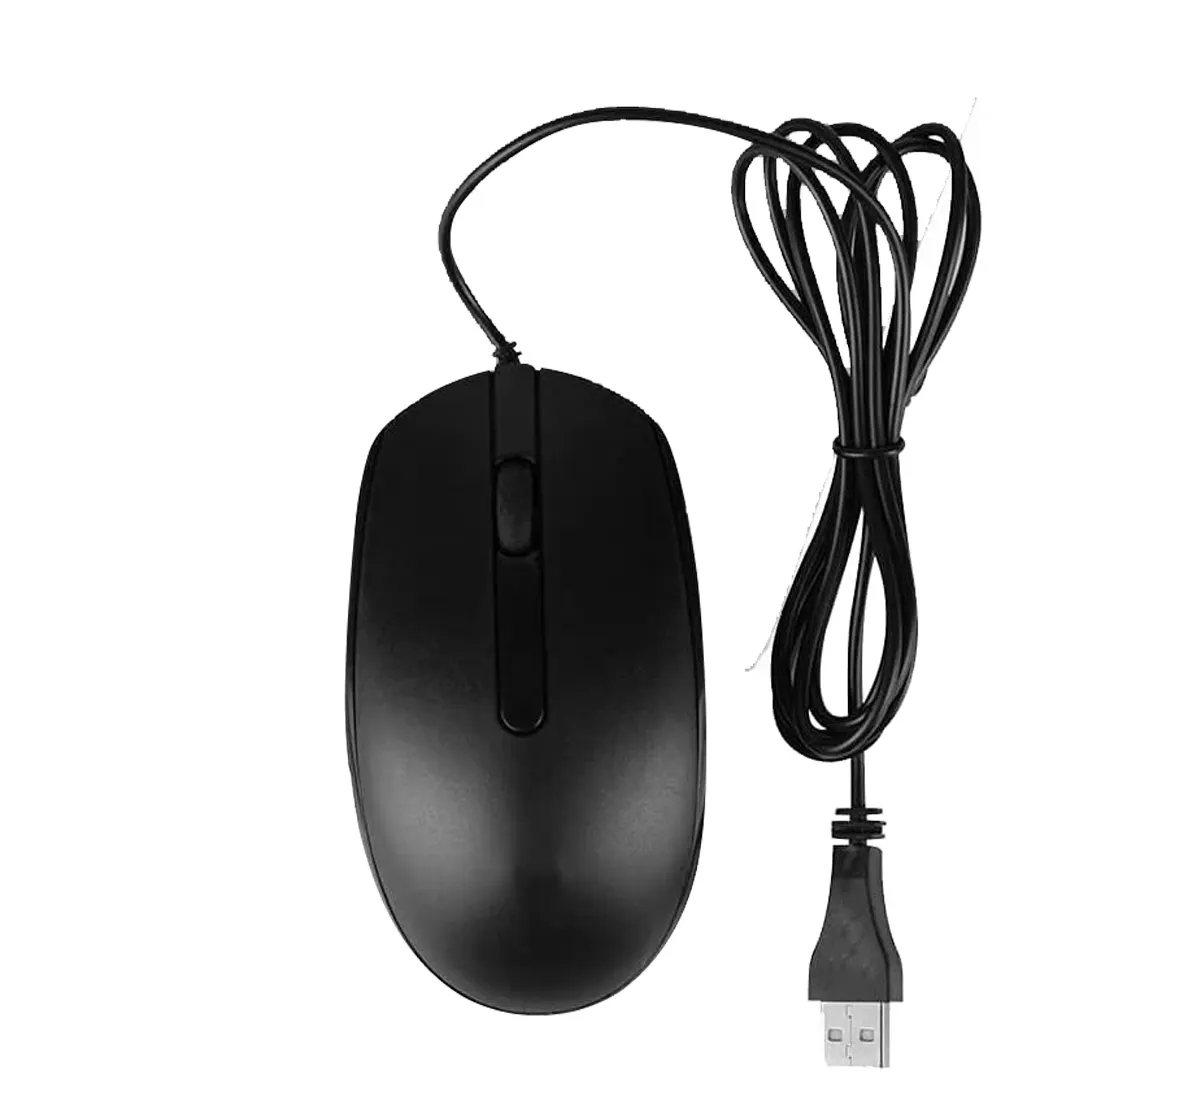 Wired Mouse USB Mice For Computer pc classrooms School Kids Students Office Travel